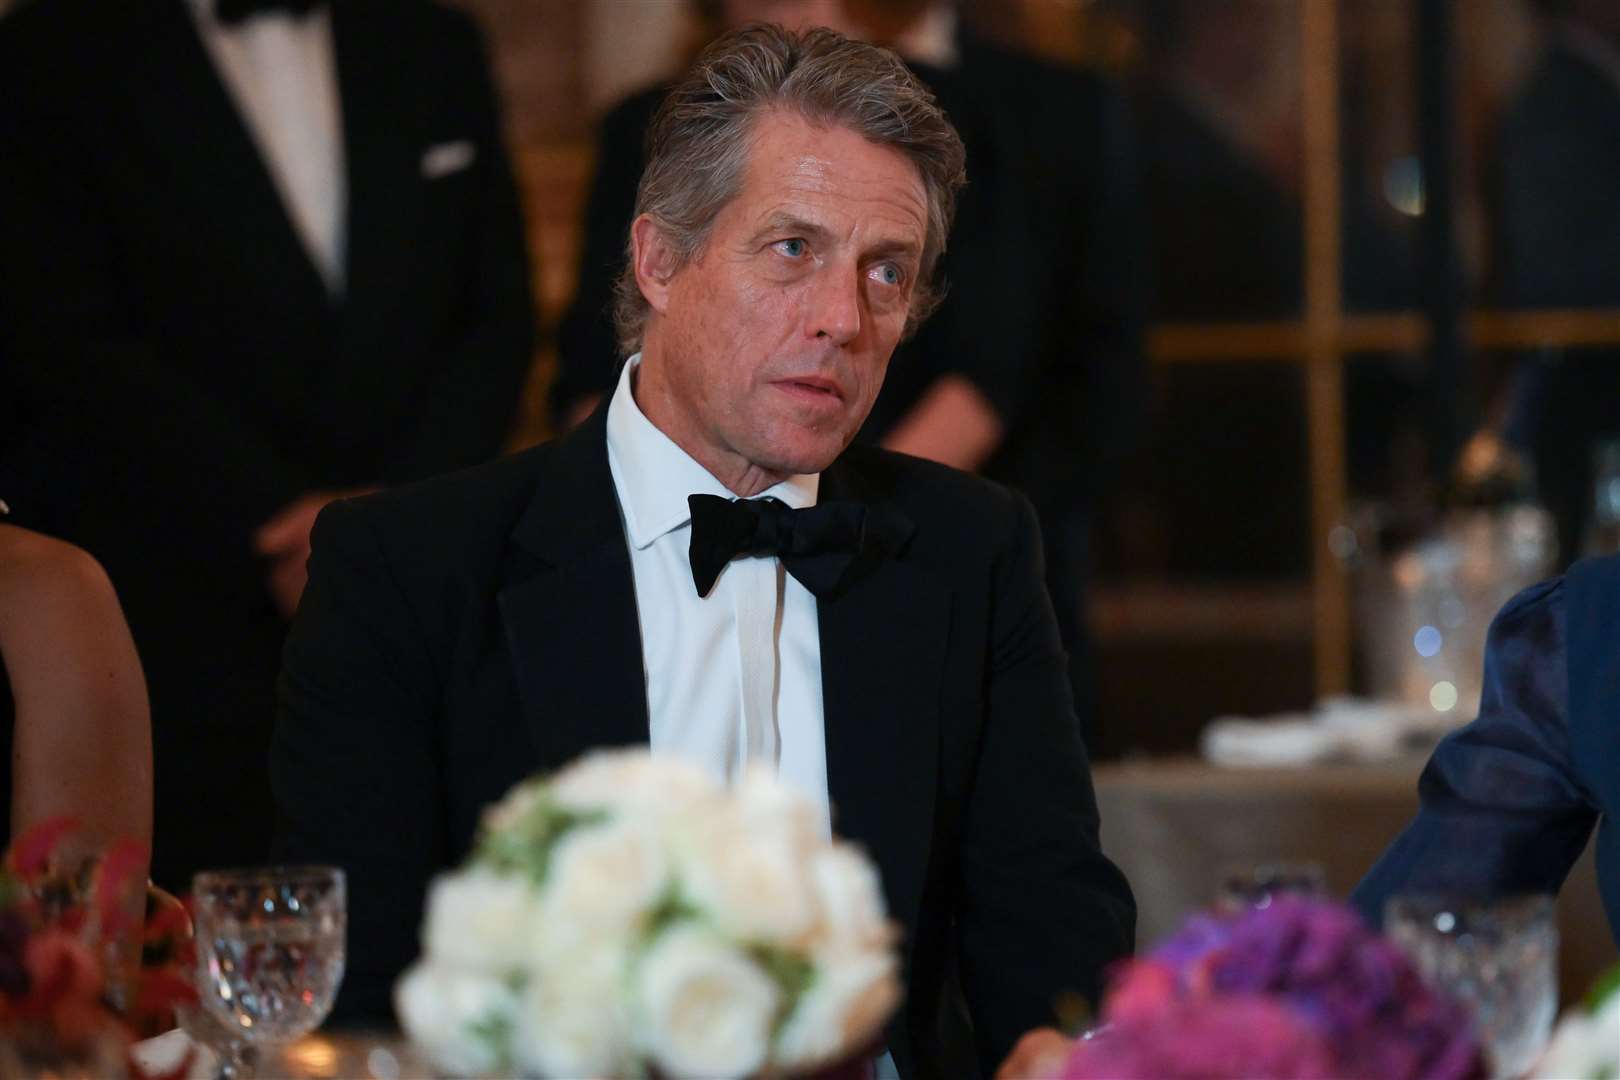 Hugh Grant attends the State Banquet at the Palace of Versailles (Daniel Leal/PA)